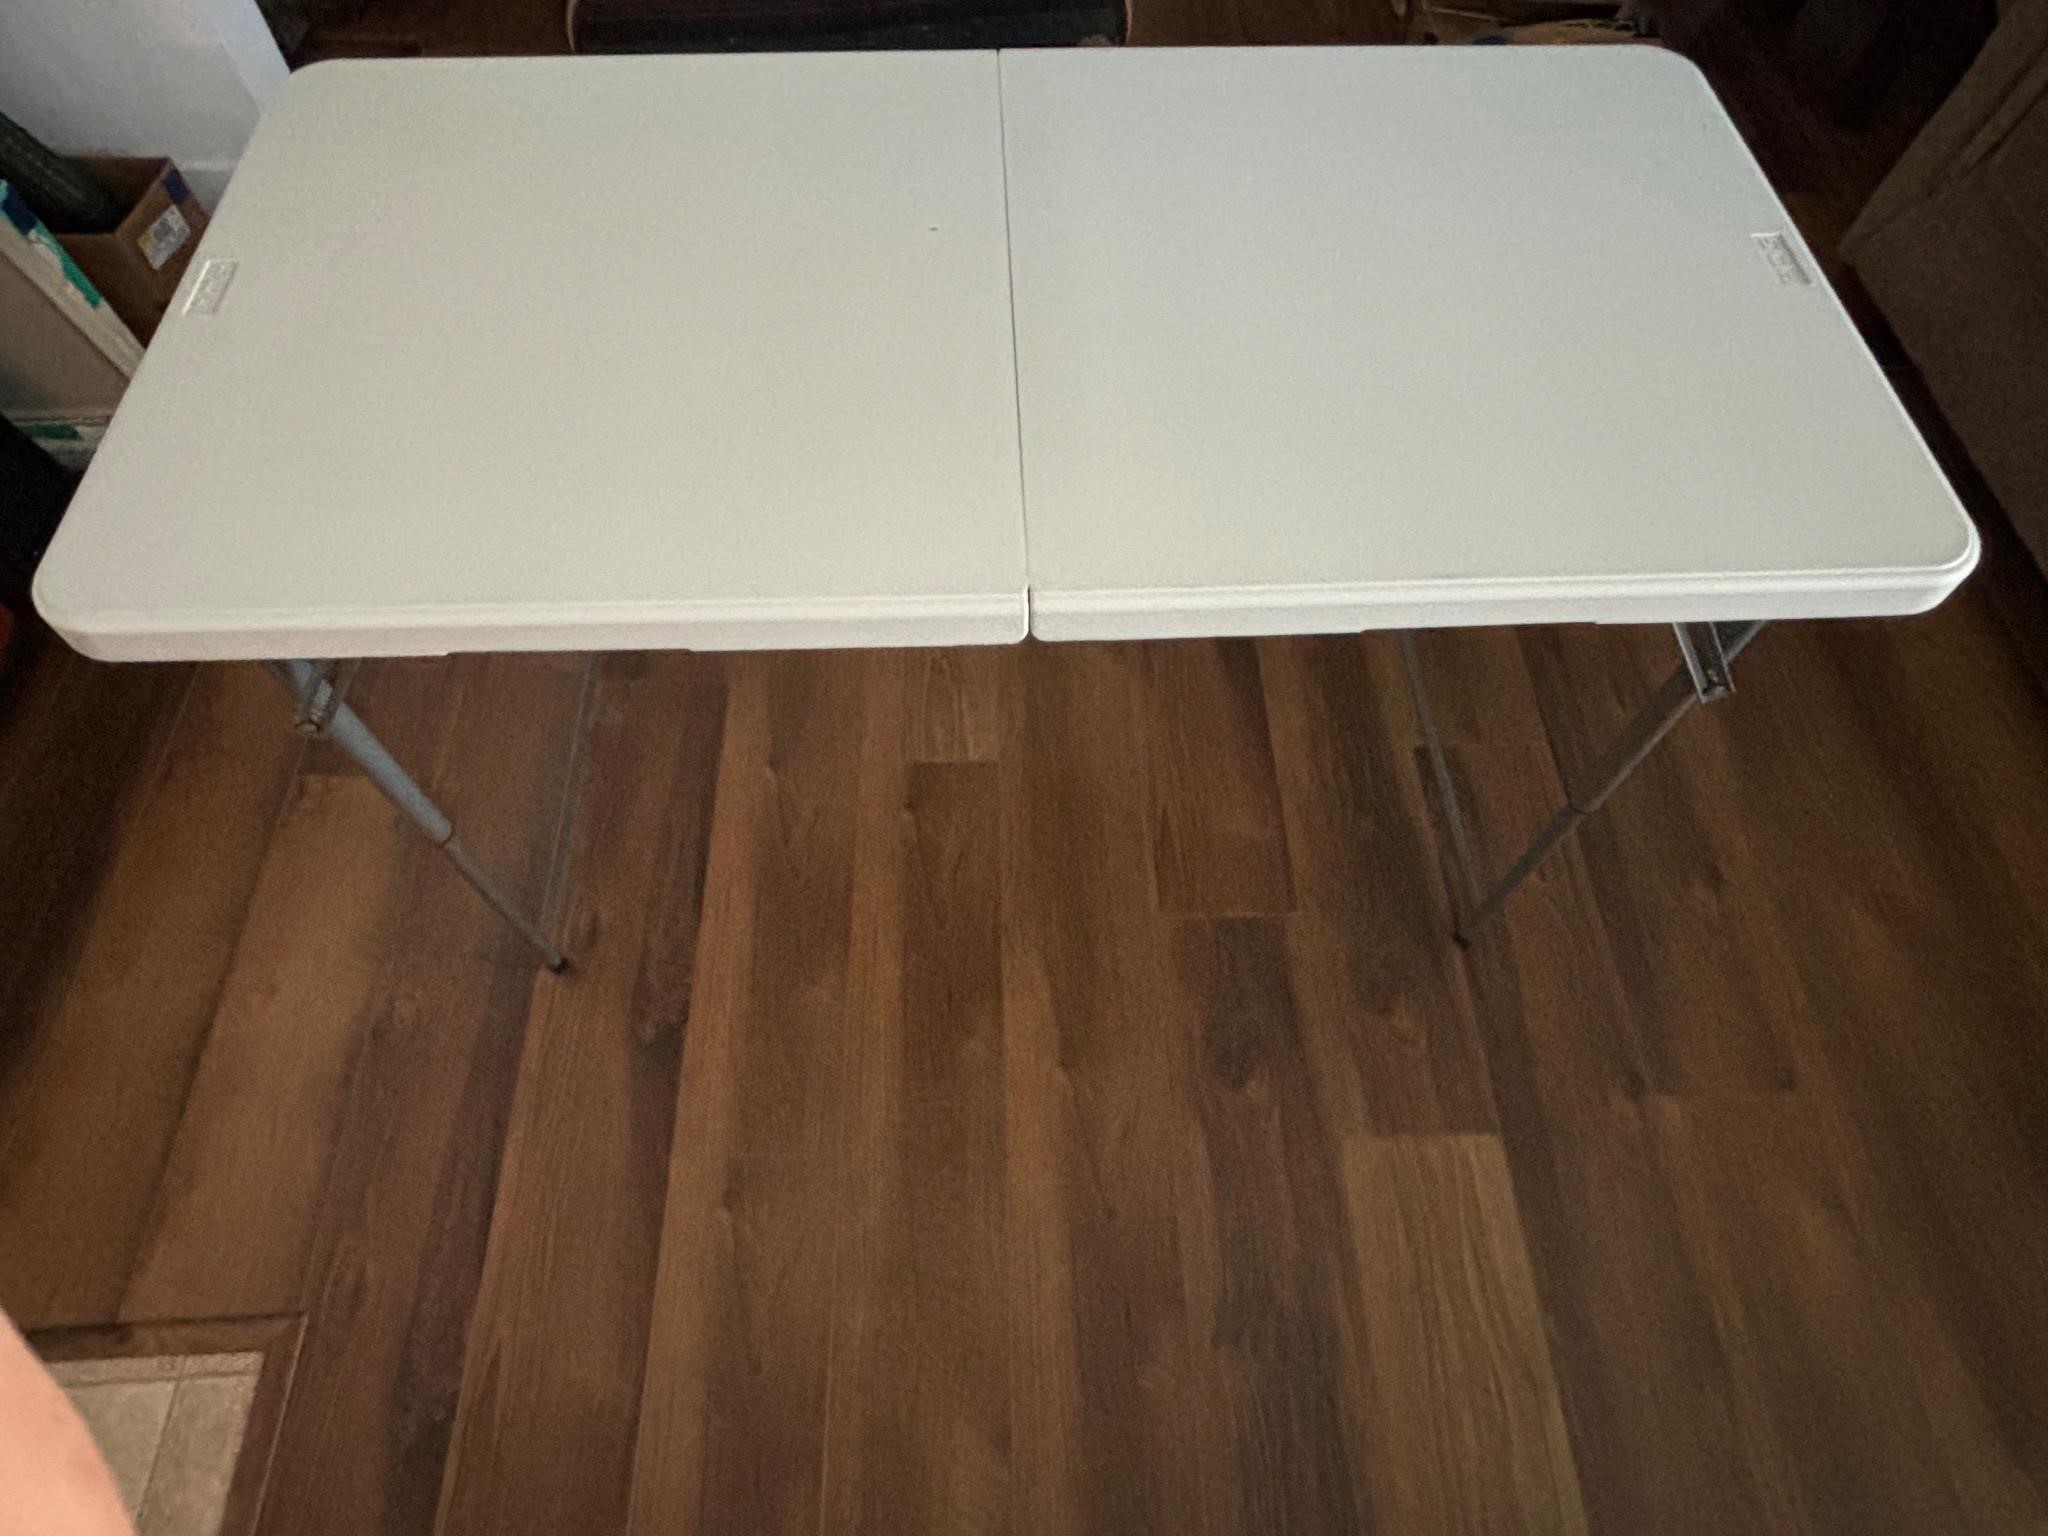 PDG 4’ Adjustable Height Center Fold Table